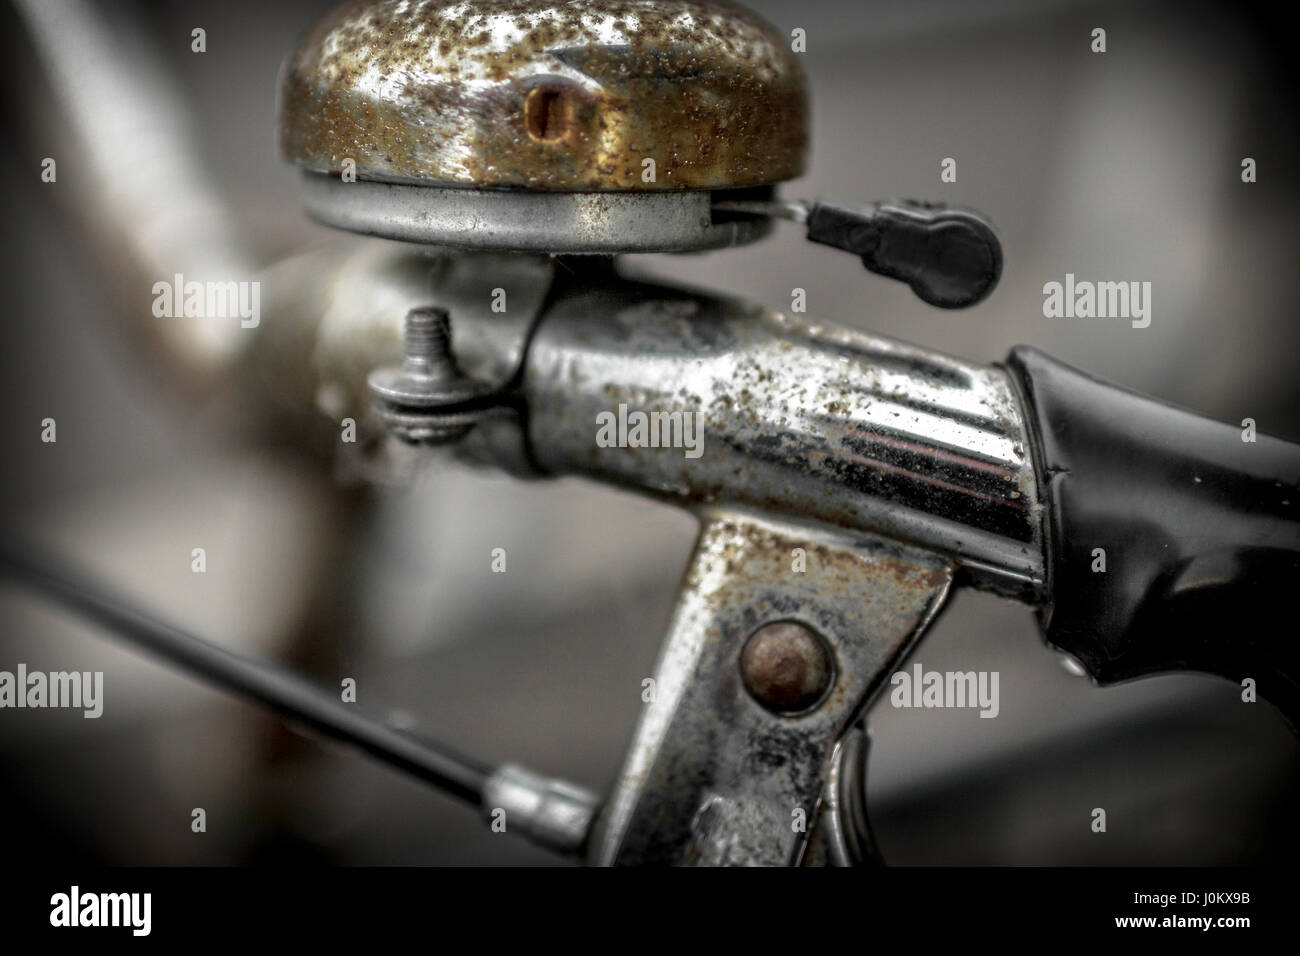 Old bicycle bell with rust. Close up image. Defocused blurry background. Stock Photo